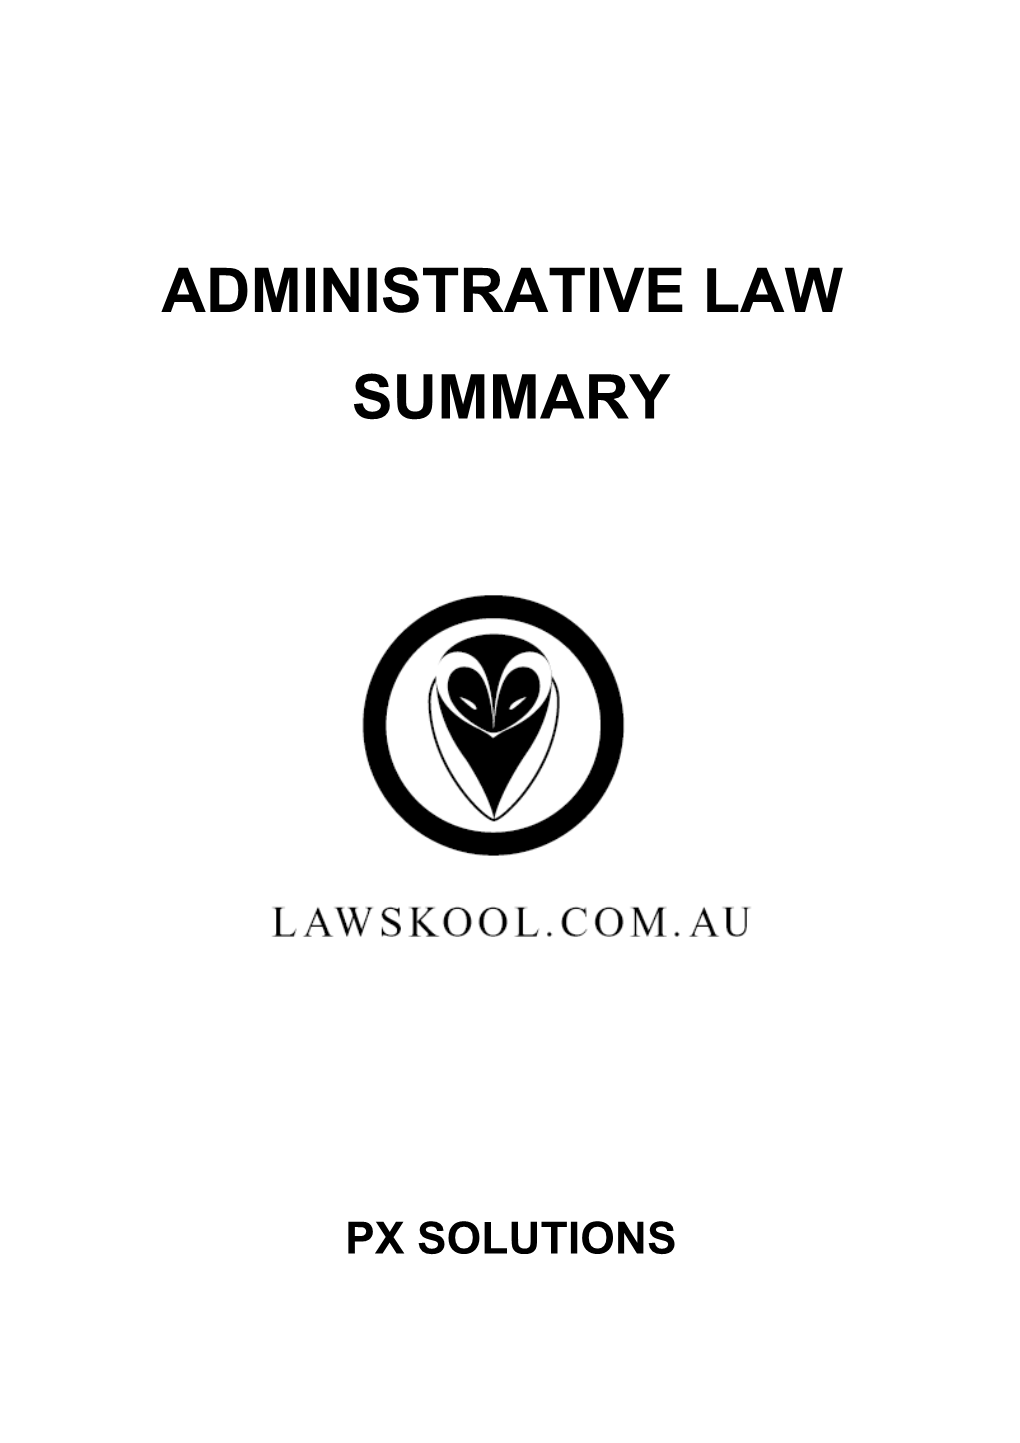 The Framework of Administrative Law